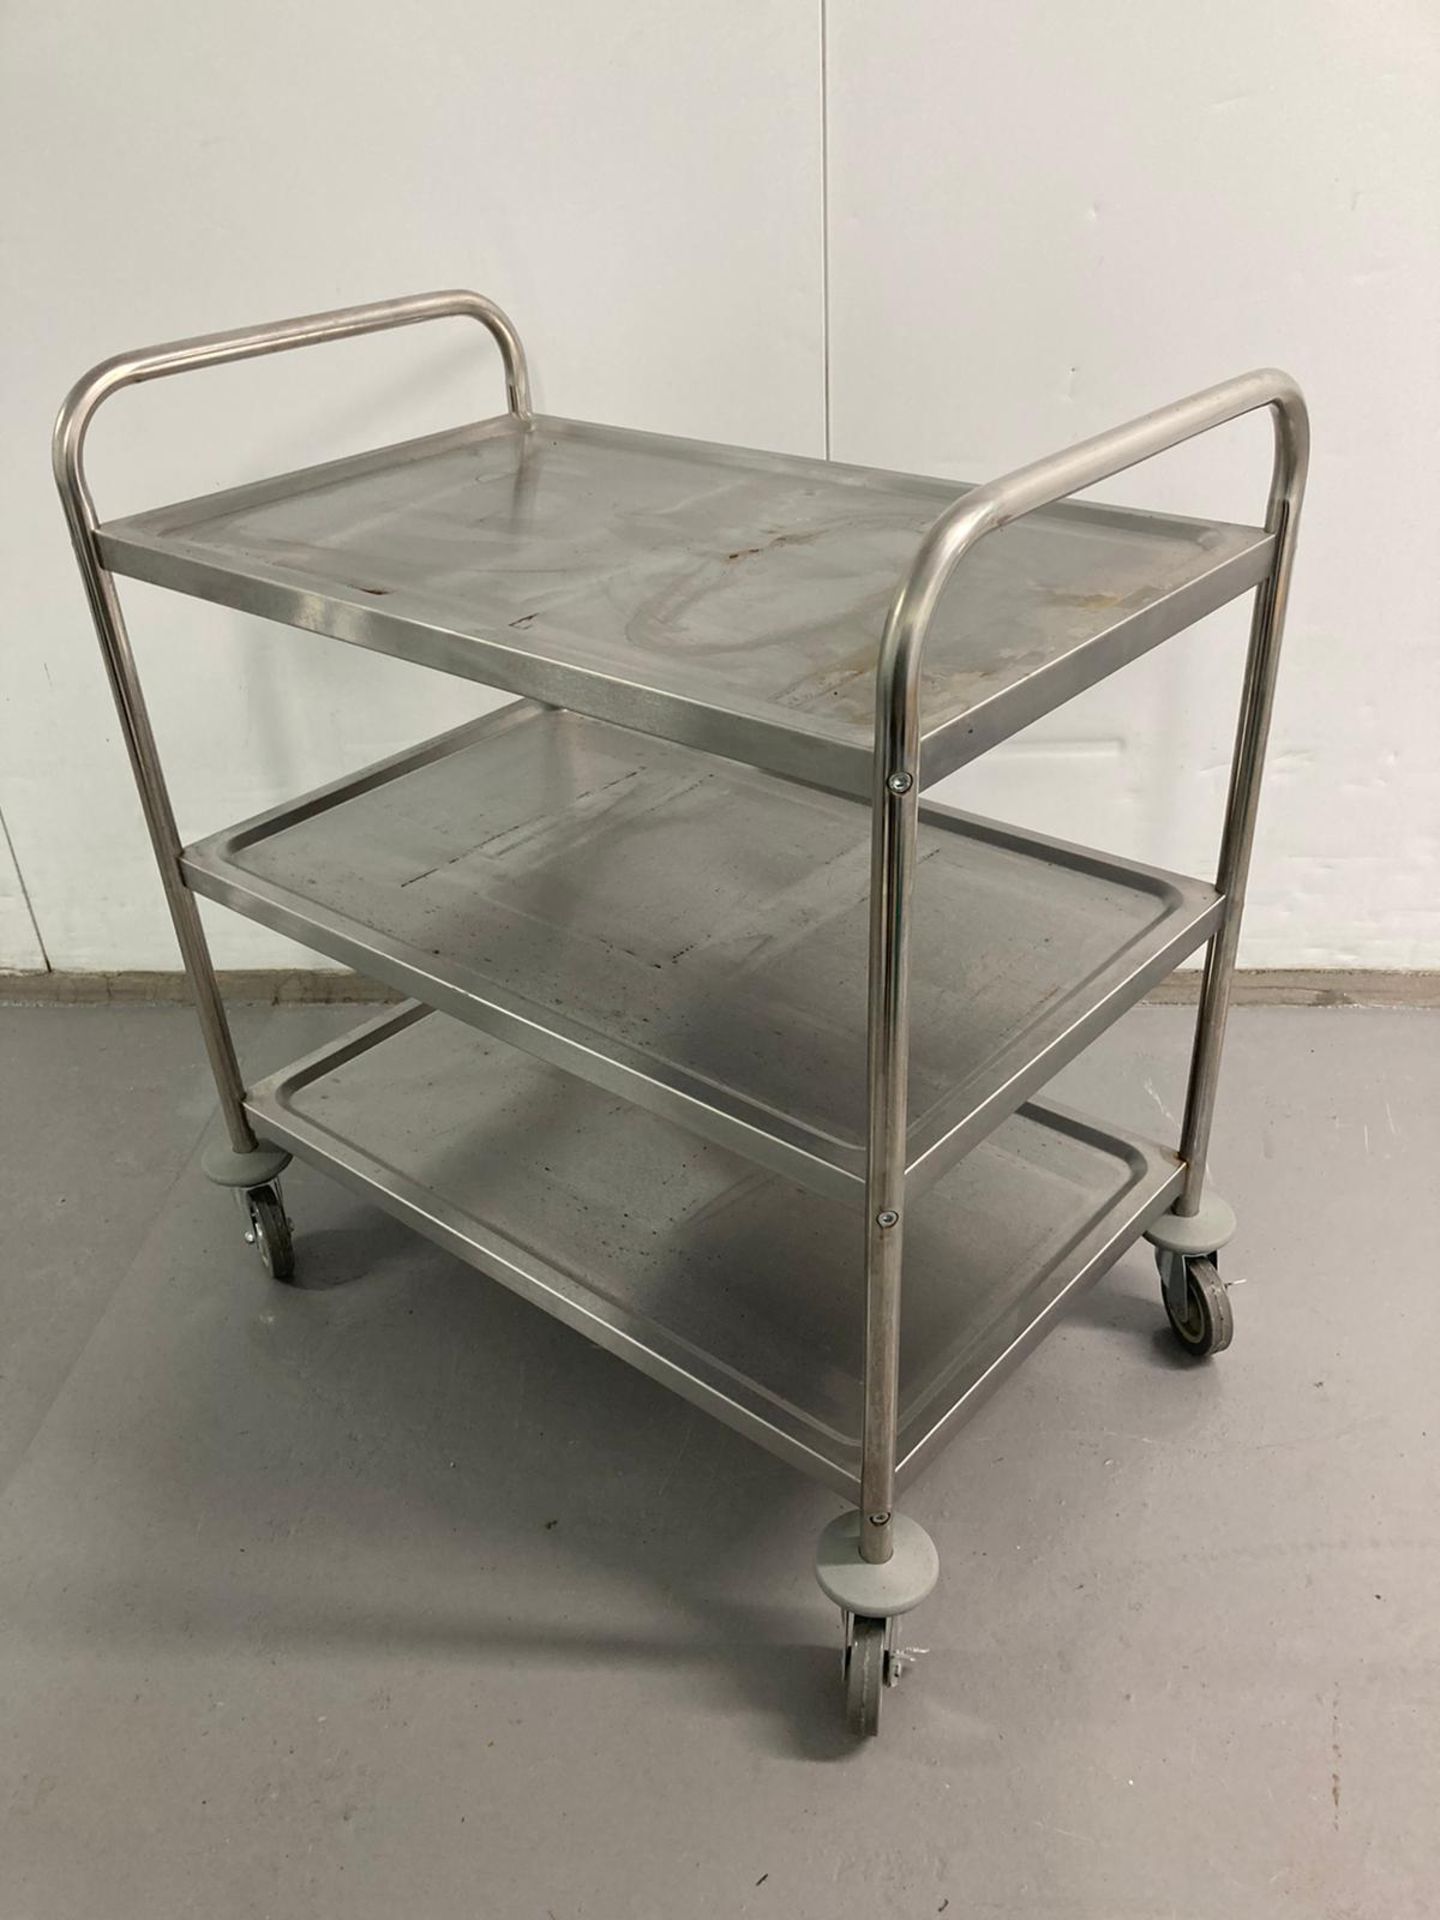 Vogue Stainless Steel Trolley - Image 3 of 5